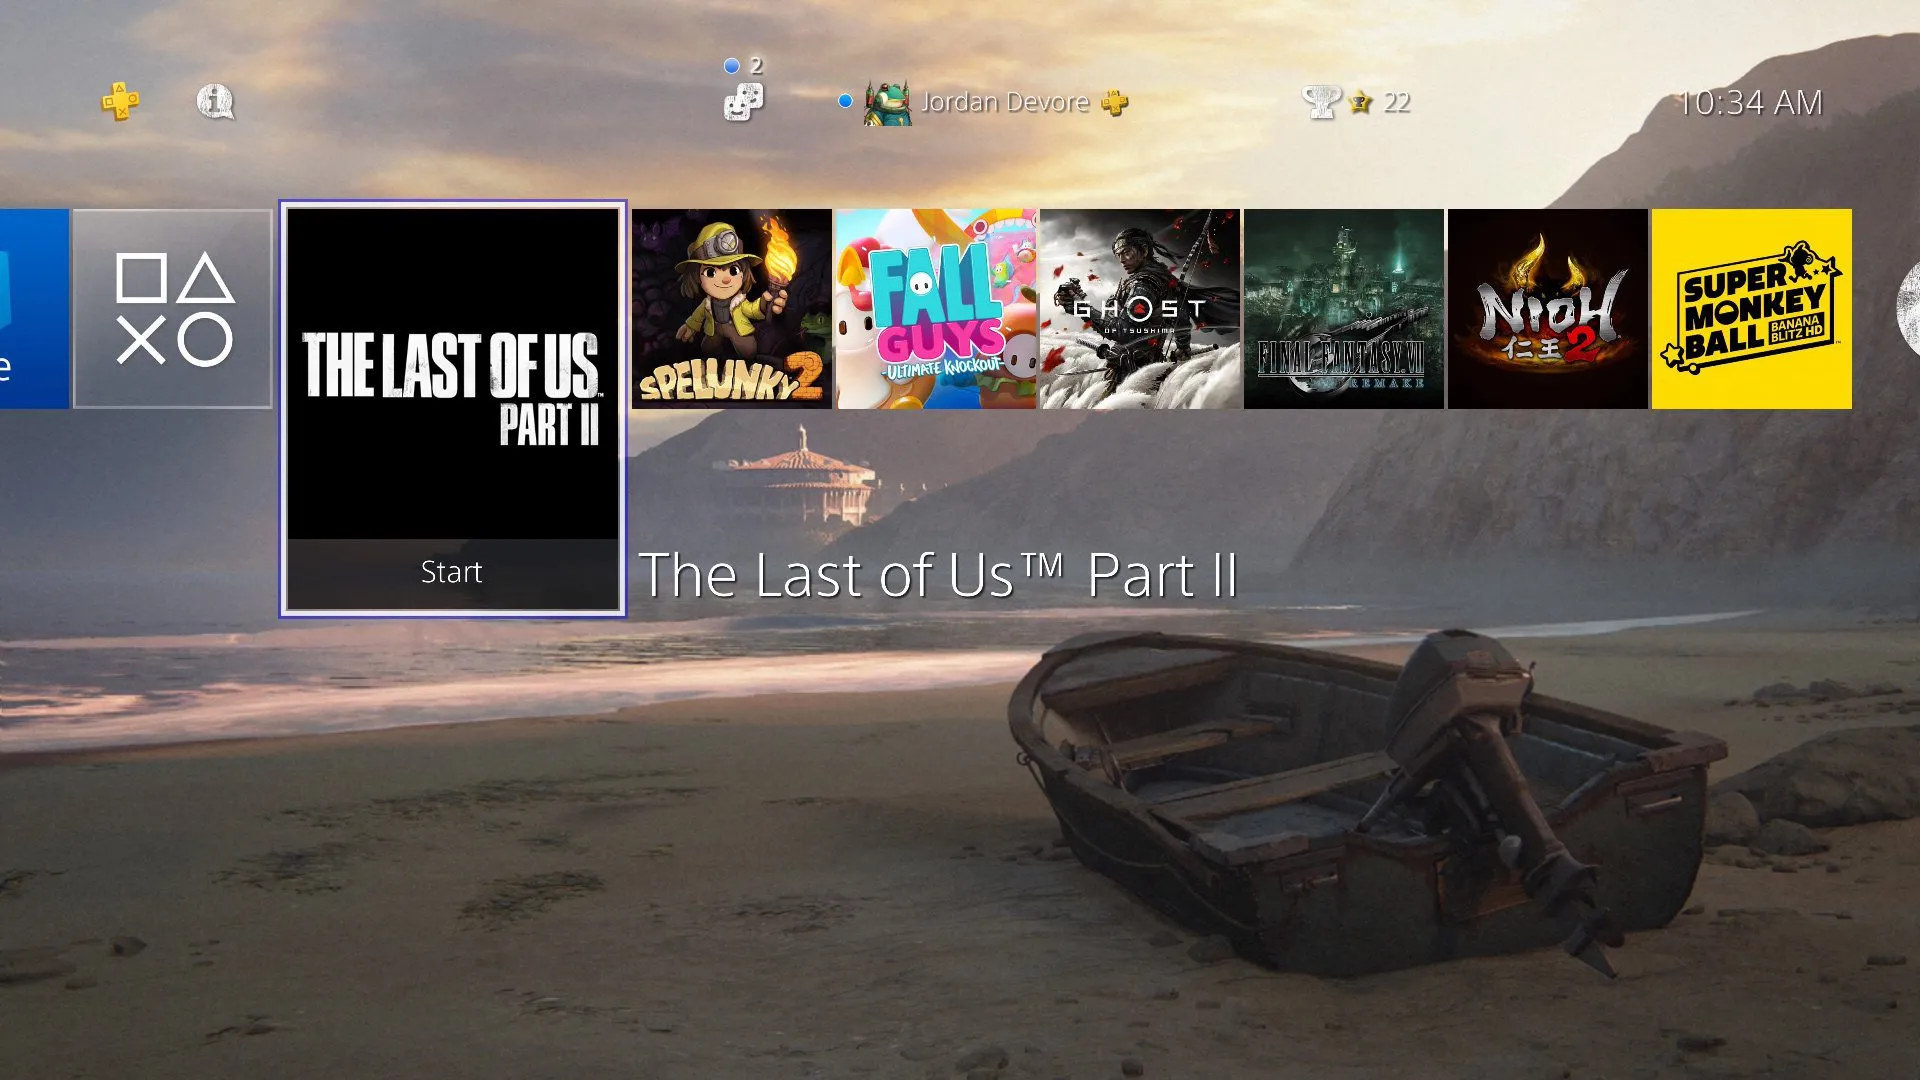 The Last of Us Part II Beach Free Dynamic PS4 Theme by Naughty Dog